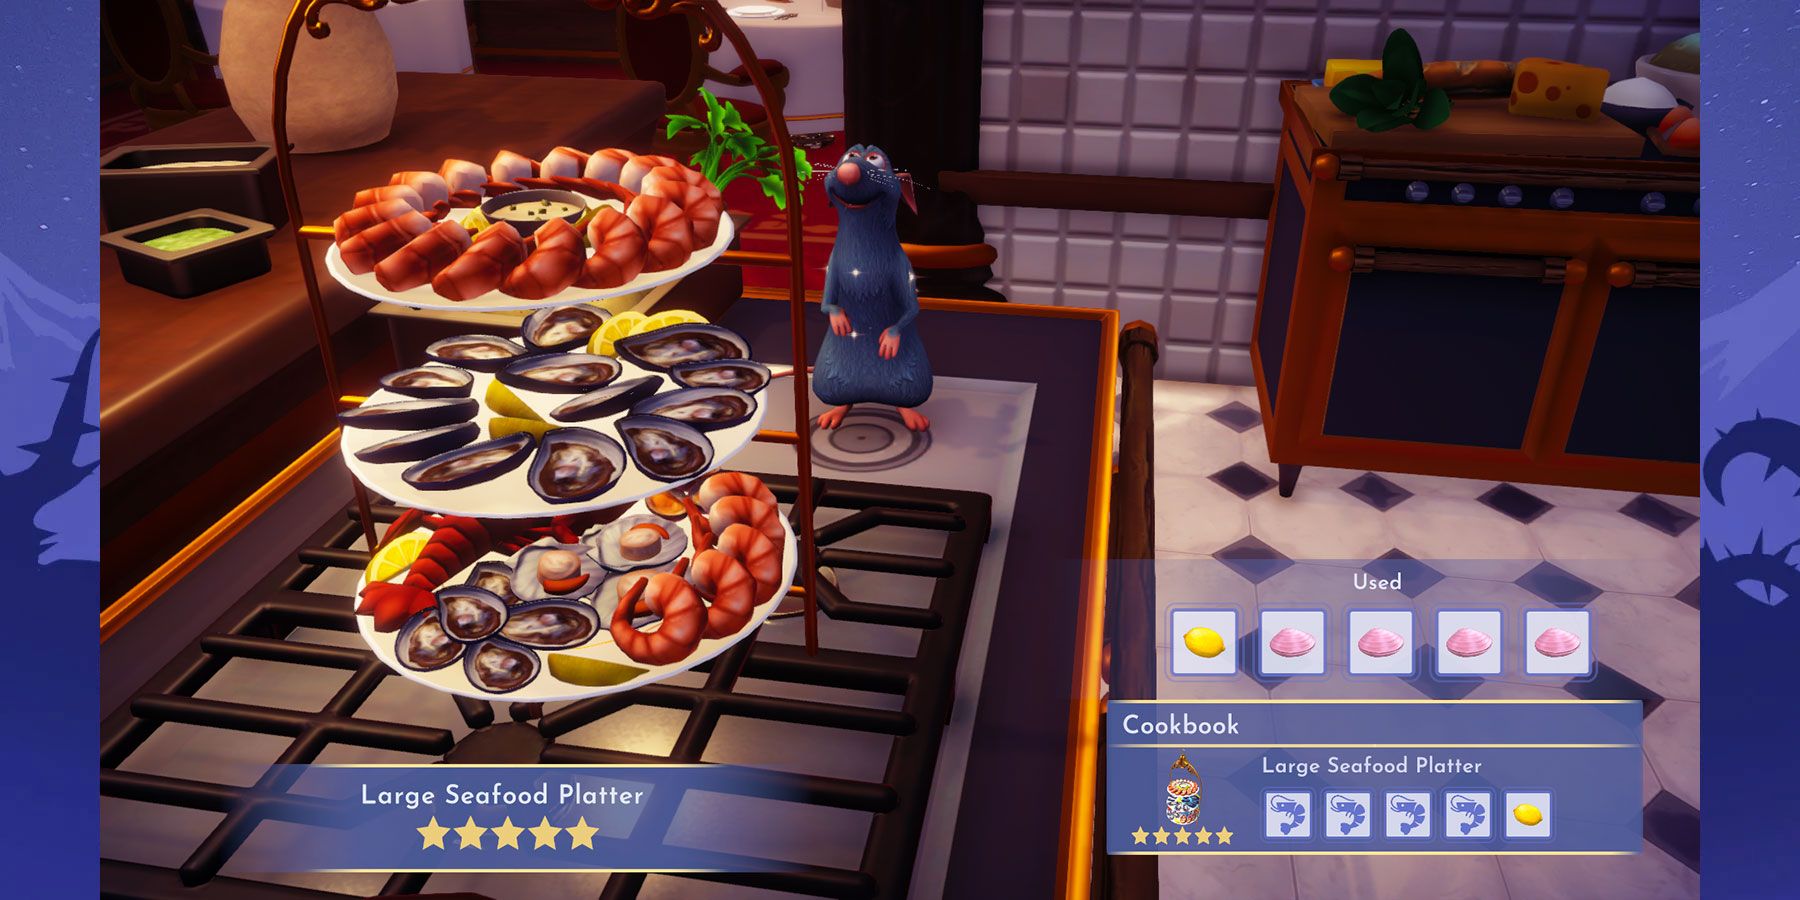 Cooking a Large Seafood Platter in Disney Dreamlight Valley.